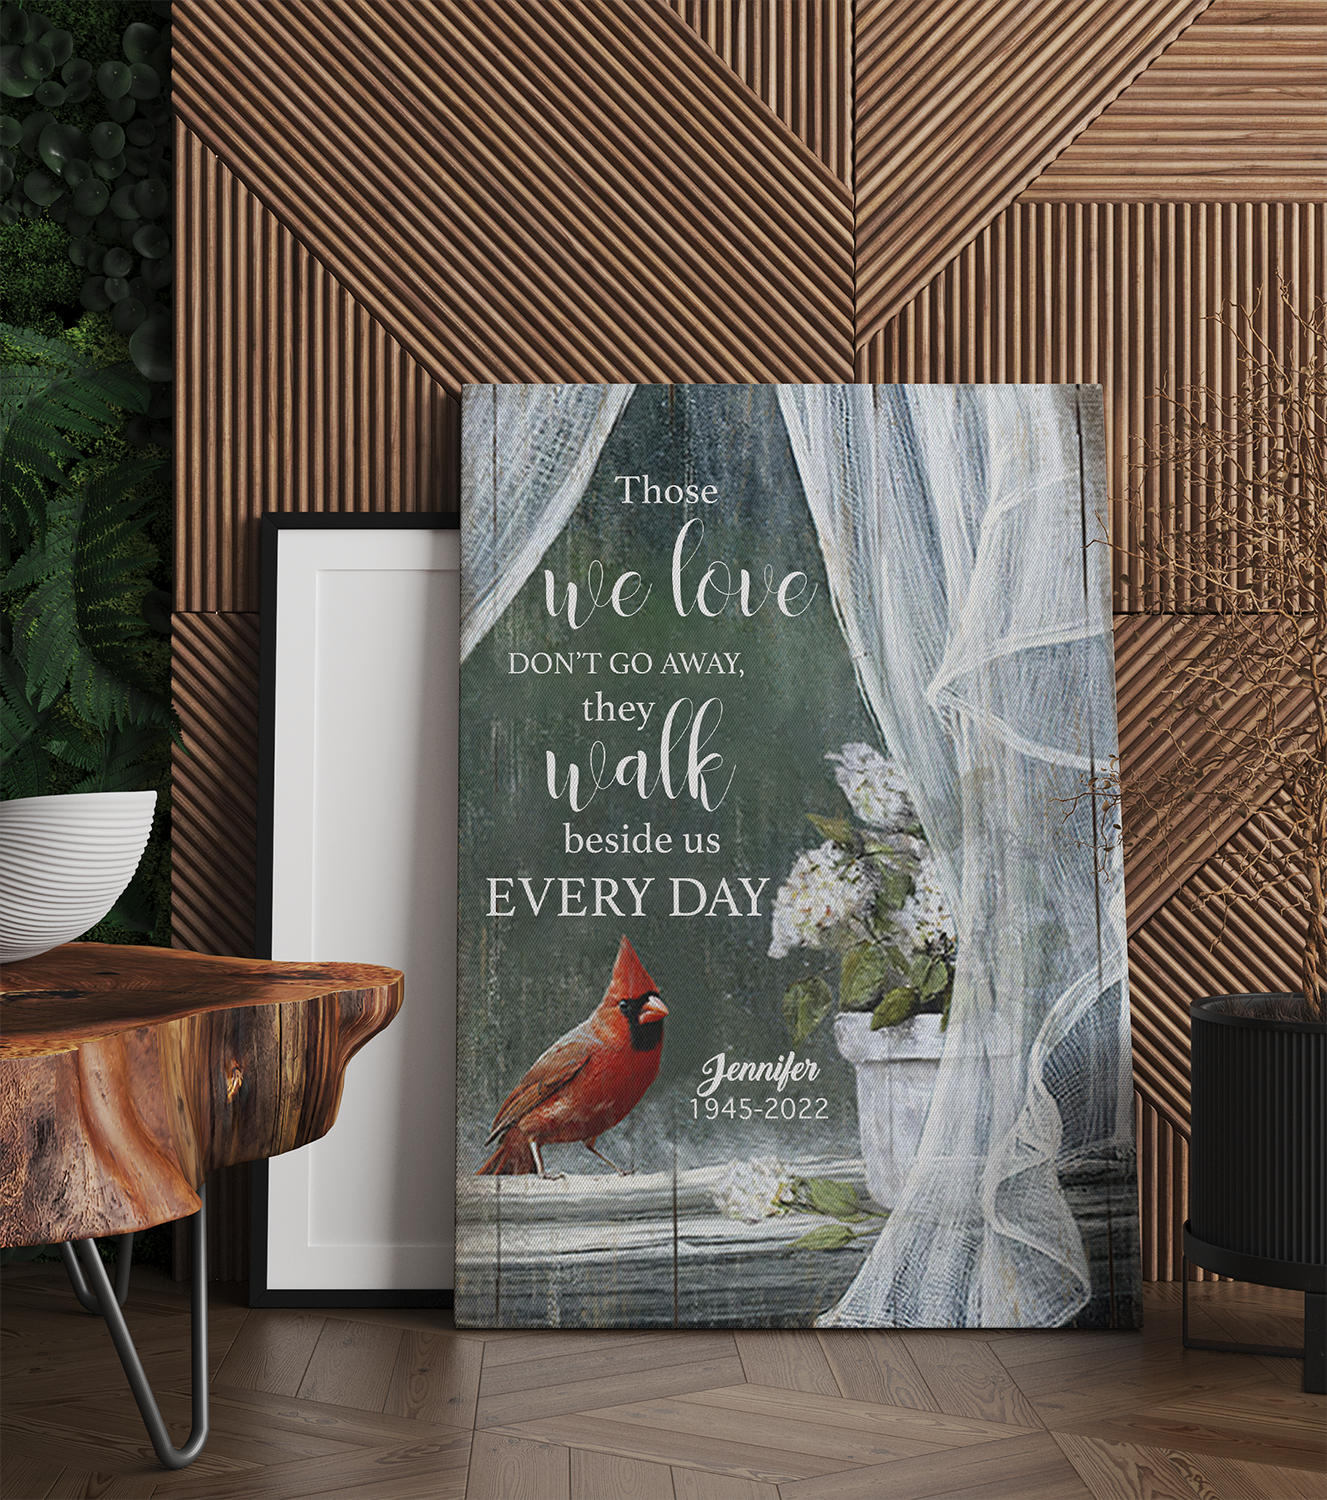 Personalized Cardinal Bird, Those We Love Don't Go Away They Walk Beside Us Every Day Canvas Prints